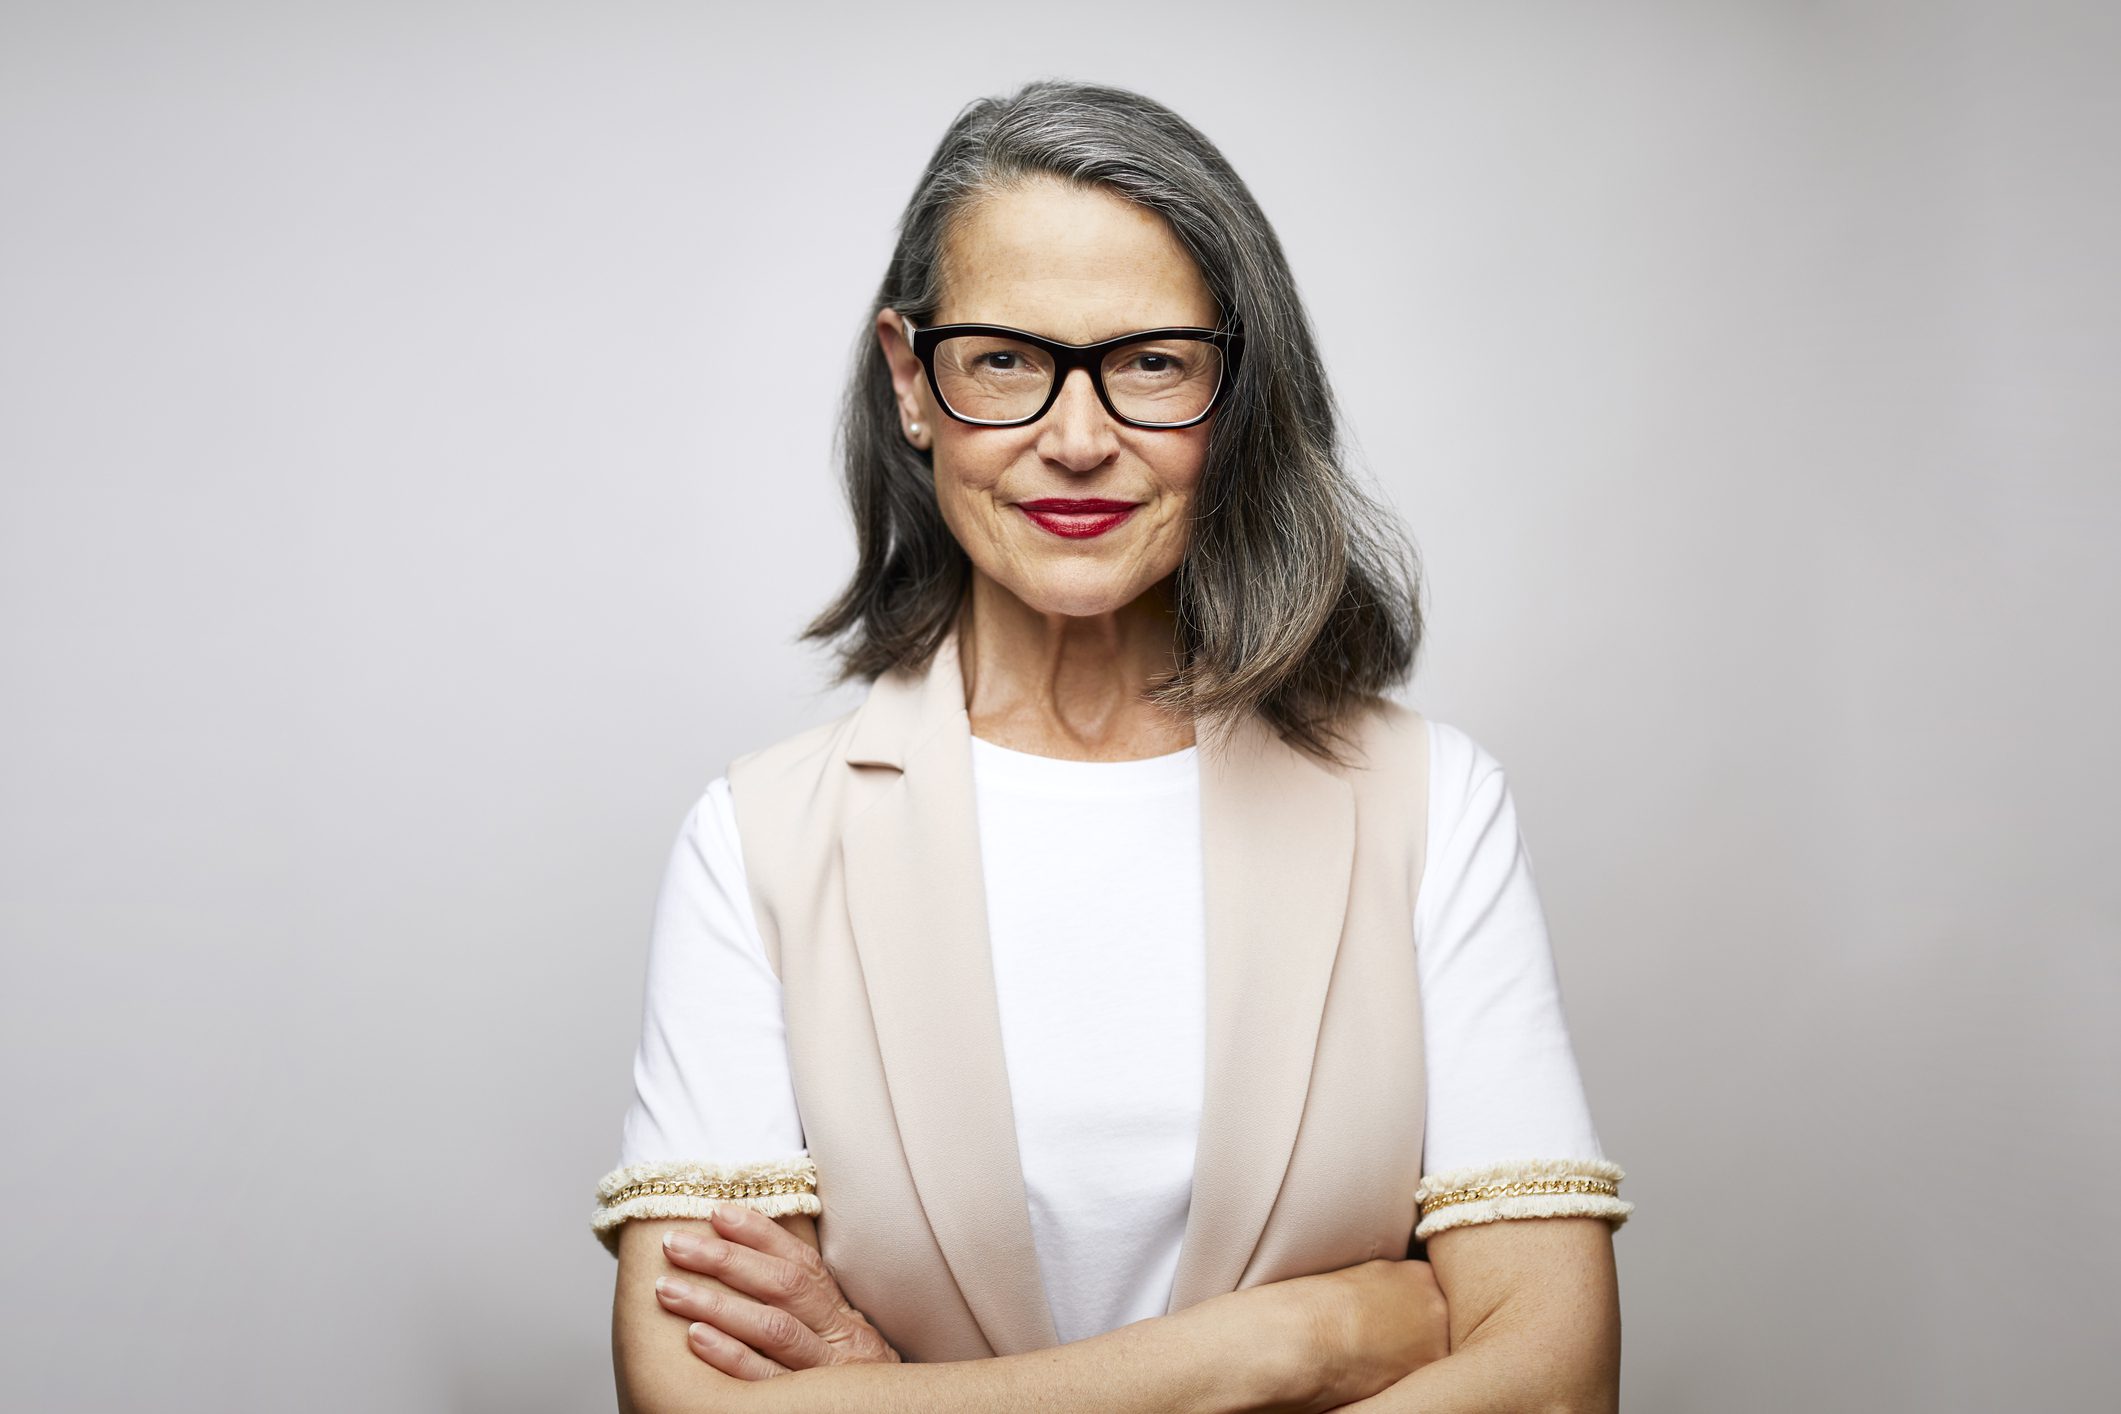 Mature female CEO with arms crossed. Confident businesswoman is against white background. Portrait of smiling design professional.